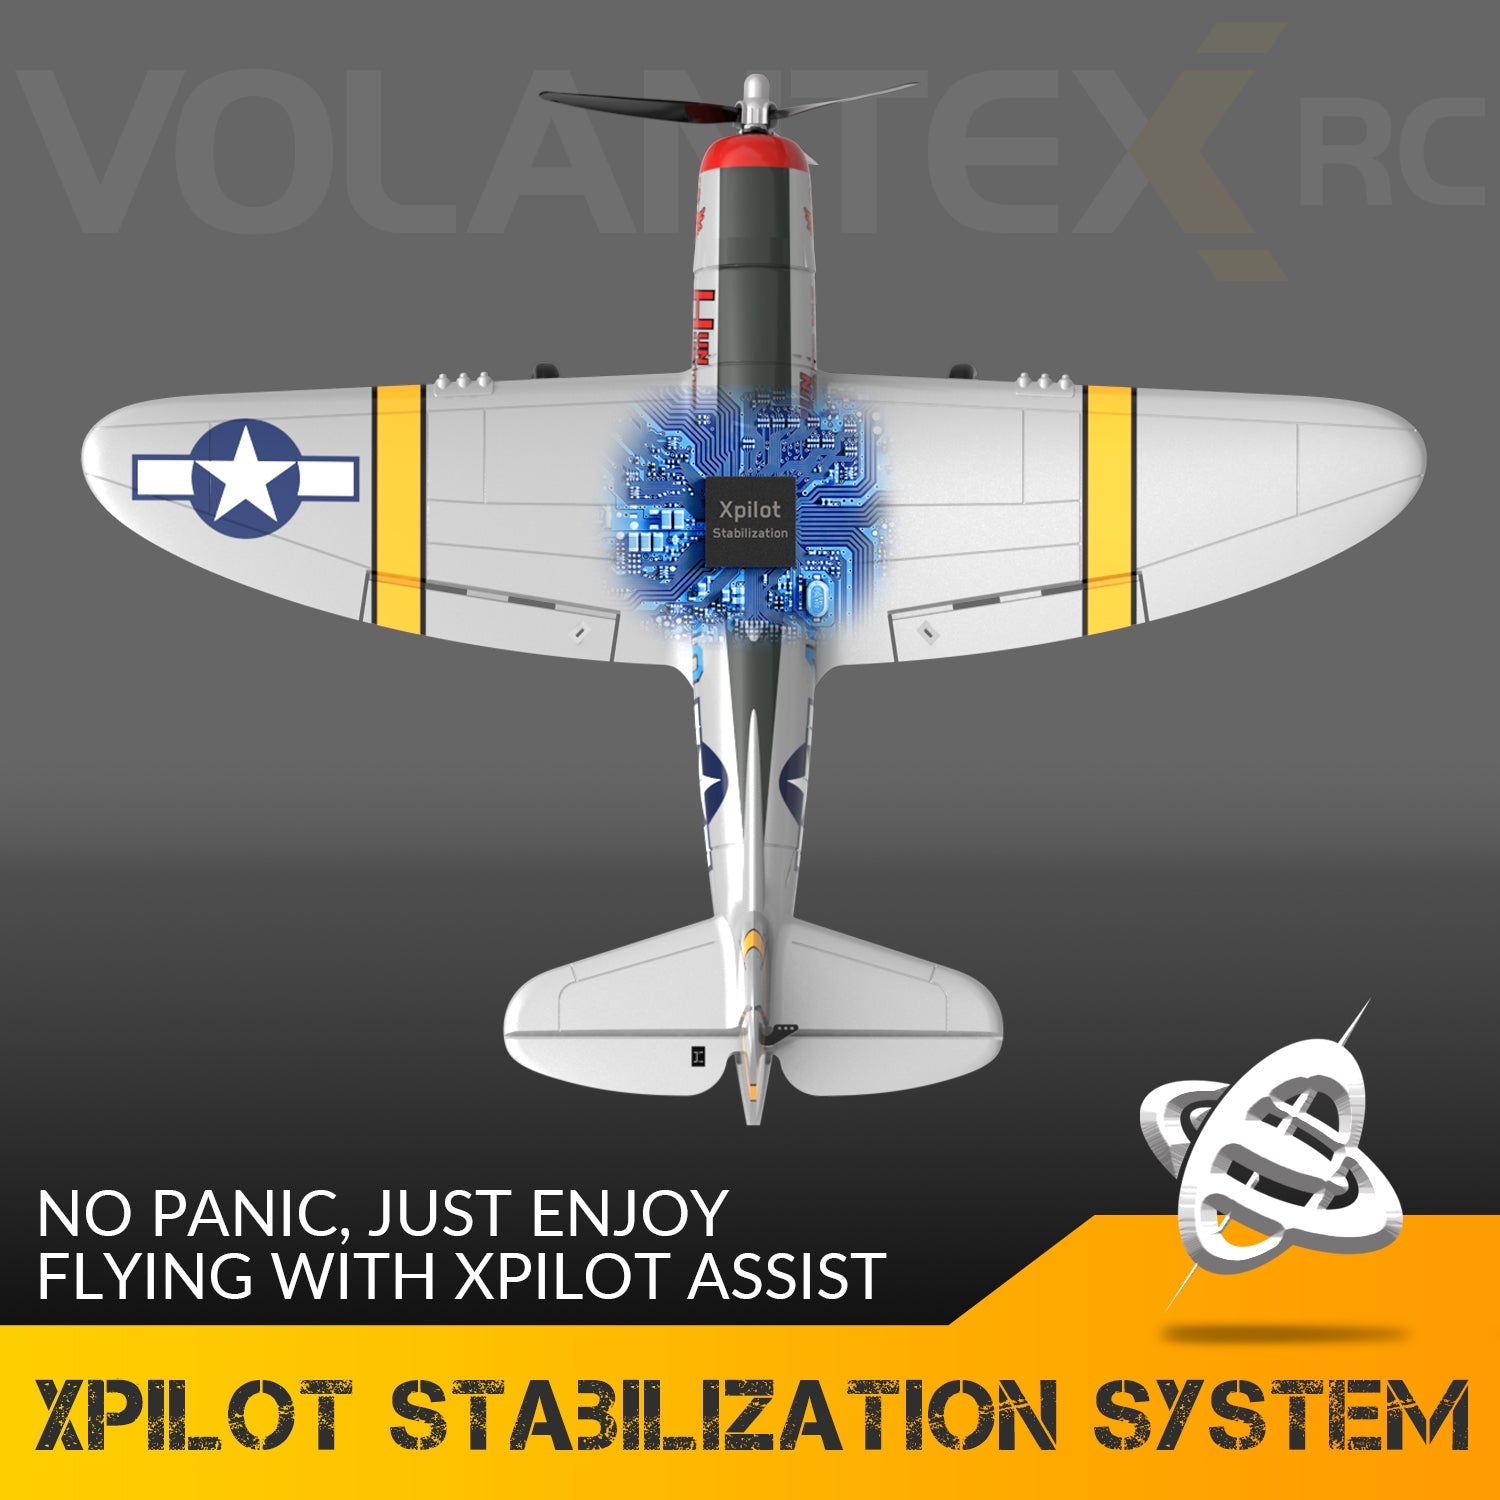 VOLANTEXRC P47 Thunderbolt (76116) PNP without Radio, Battery & Charger